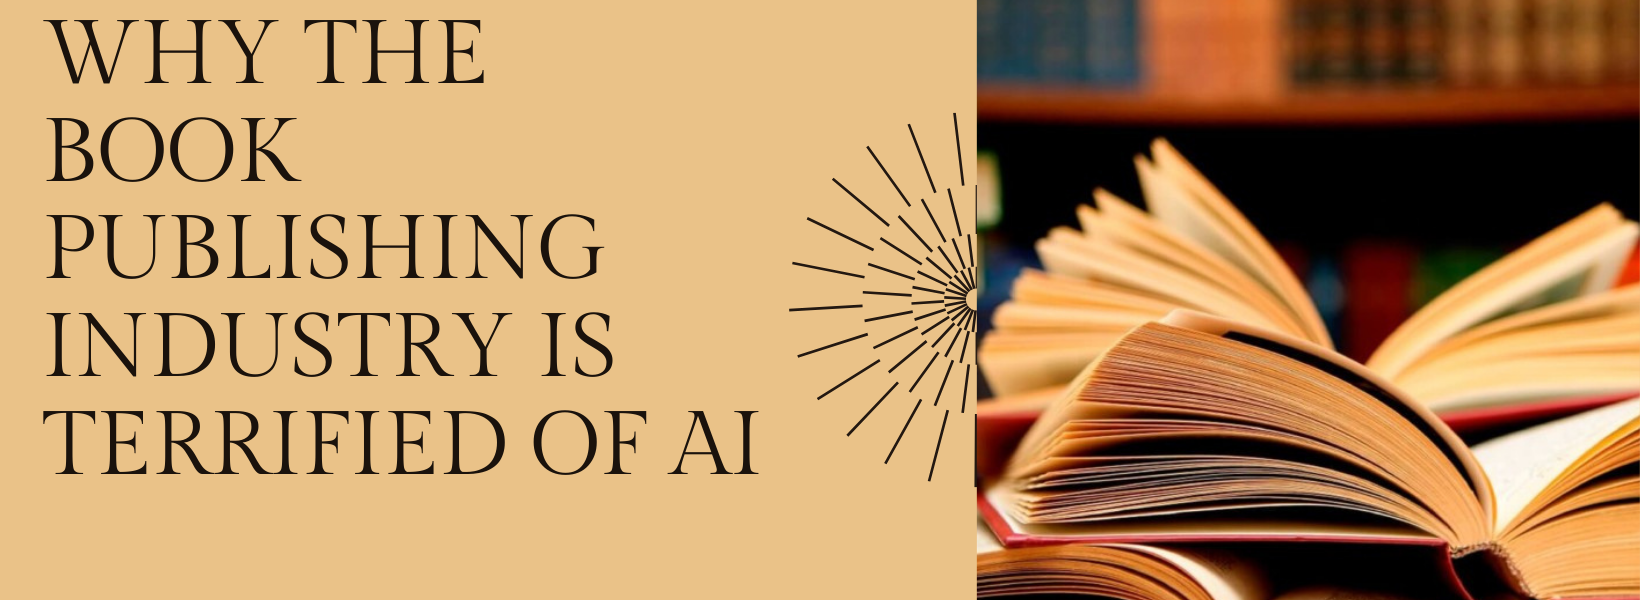 7 reasons Why the Book Publishing Industry Is Terrified of AI